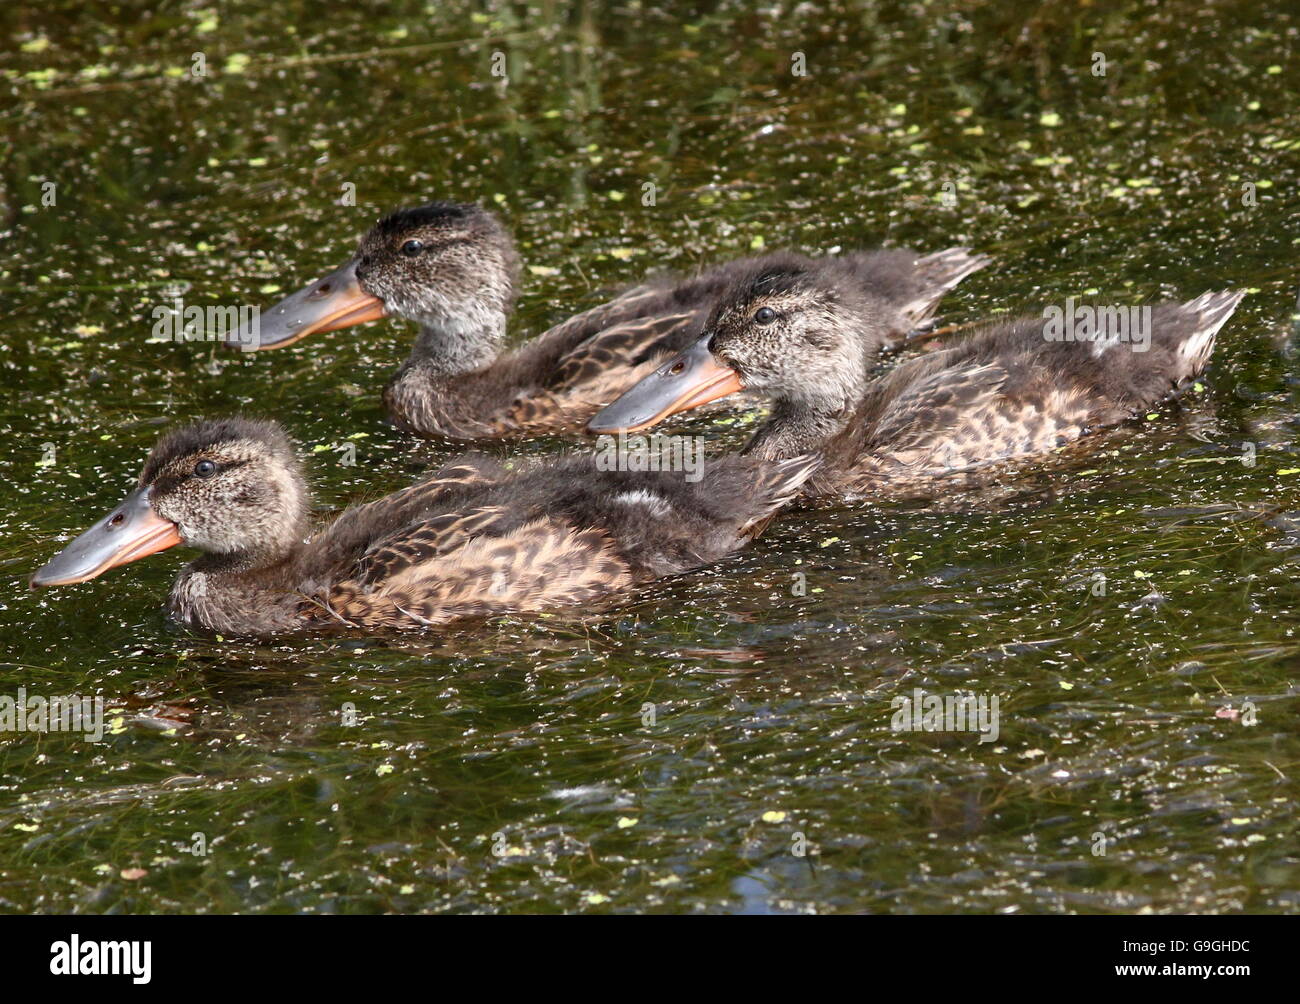 Three Northern Shoveler ducklings (Anas clypeata) swimming together Stock Photo